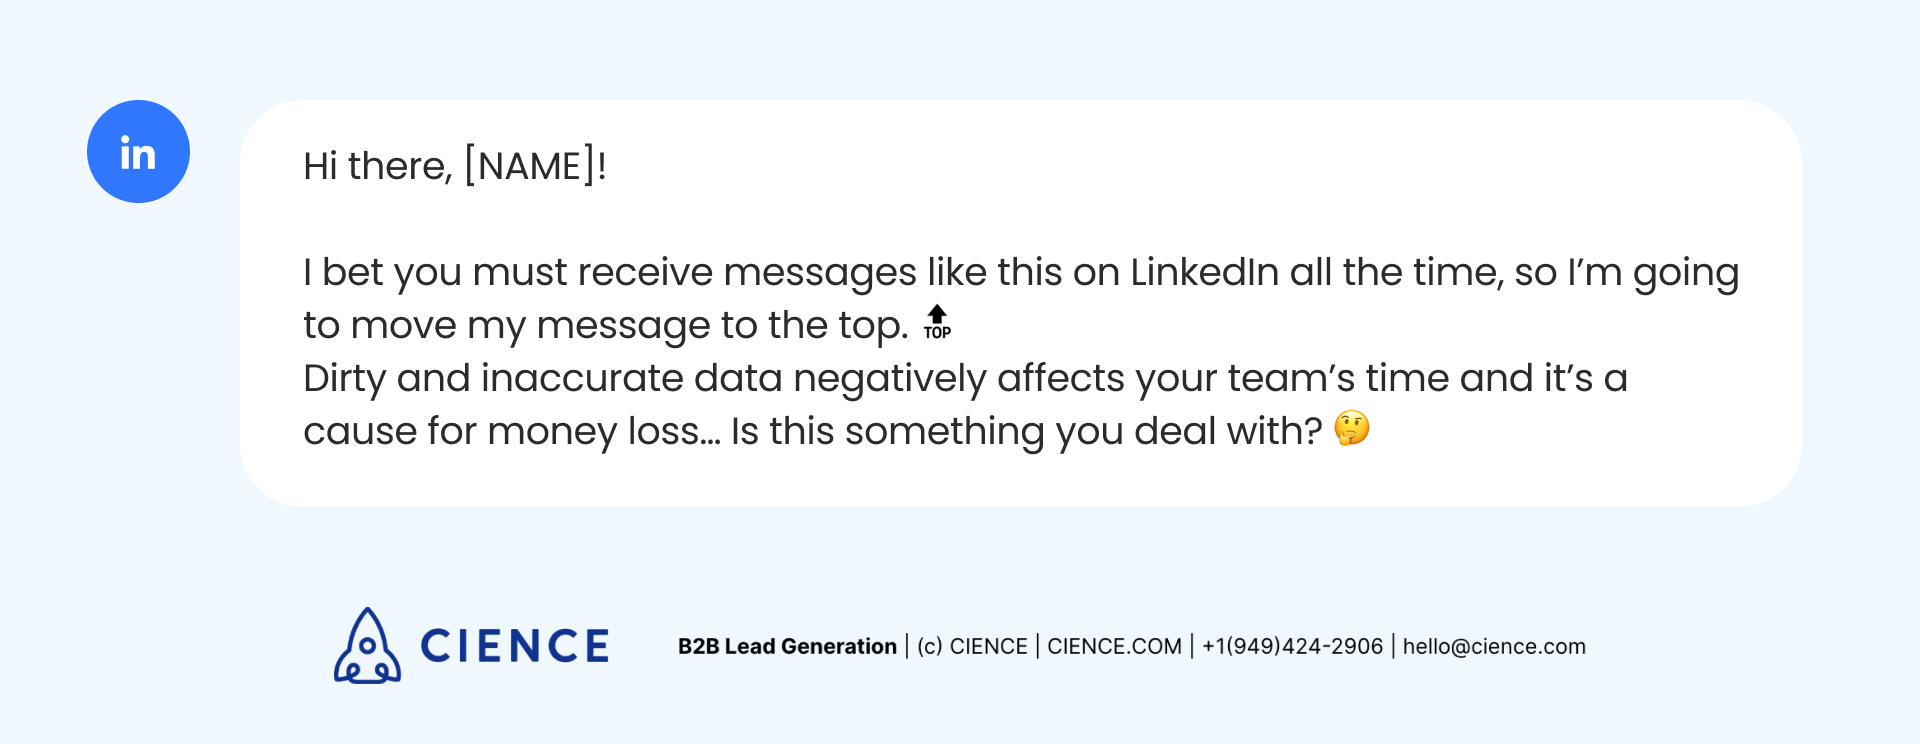 LinkedIn prospecting messages - humor approach